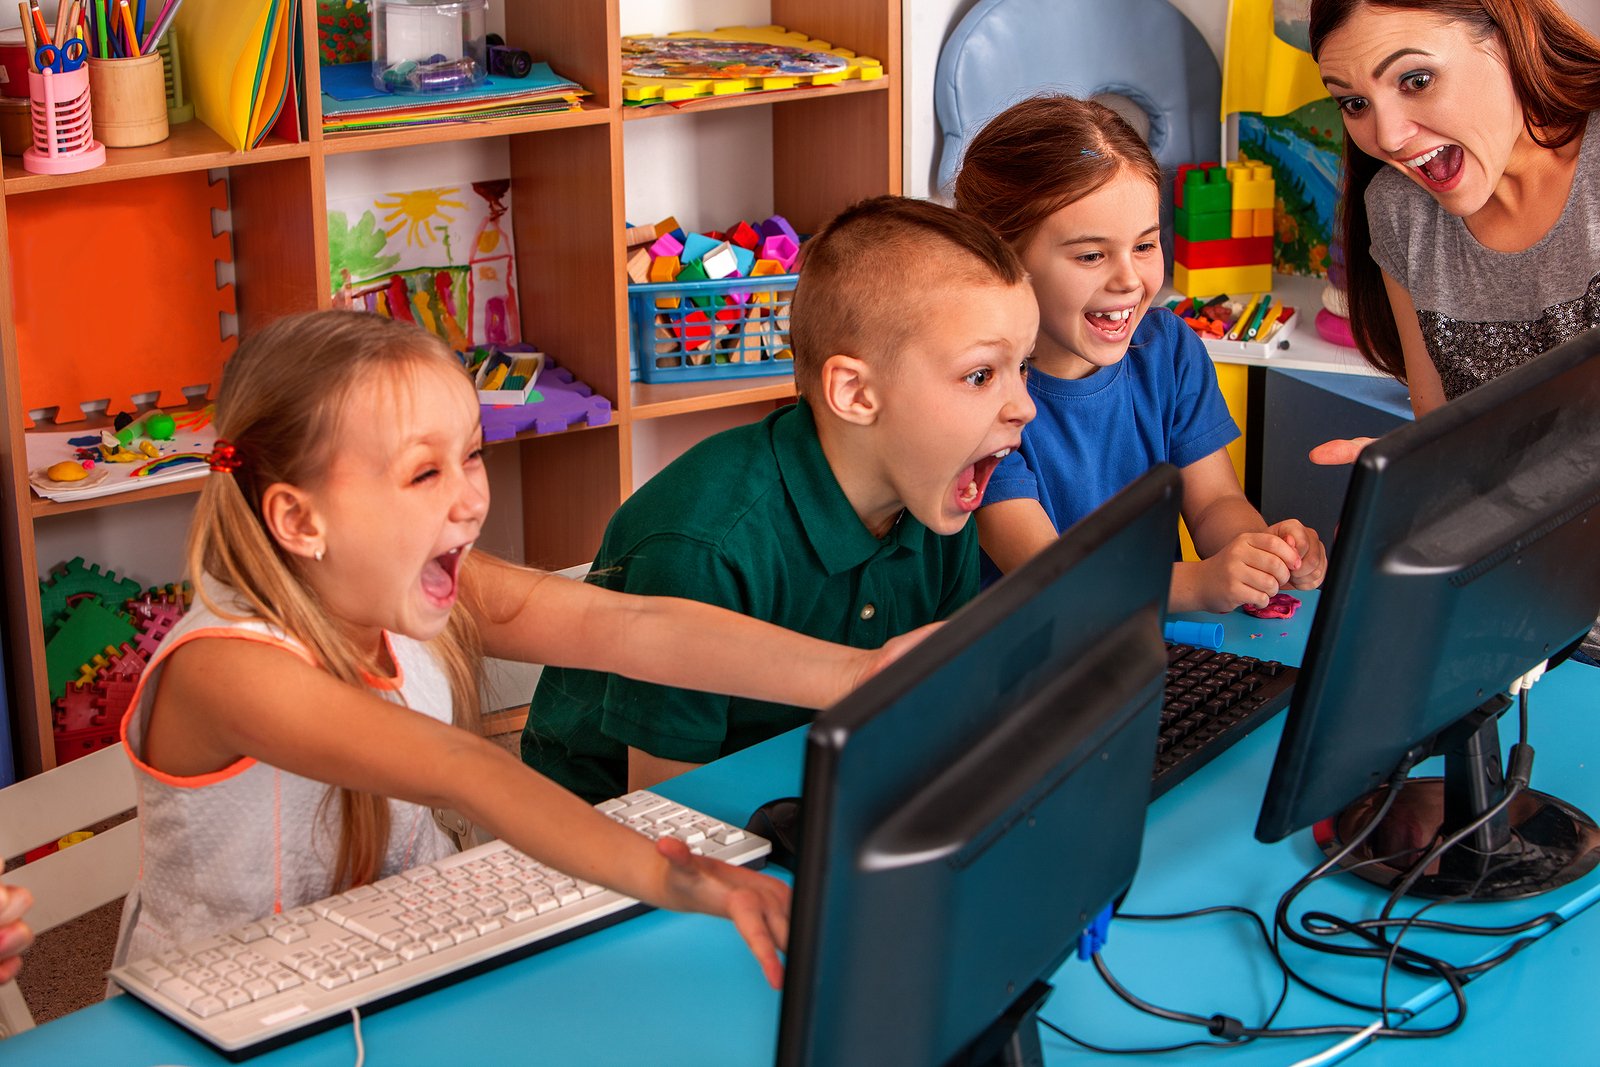 Children computer class us for education and video game